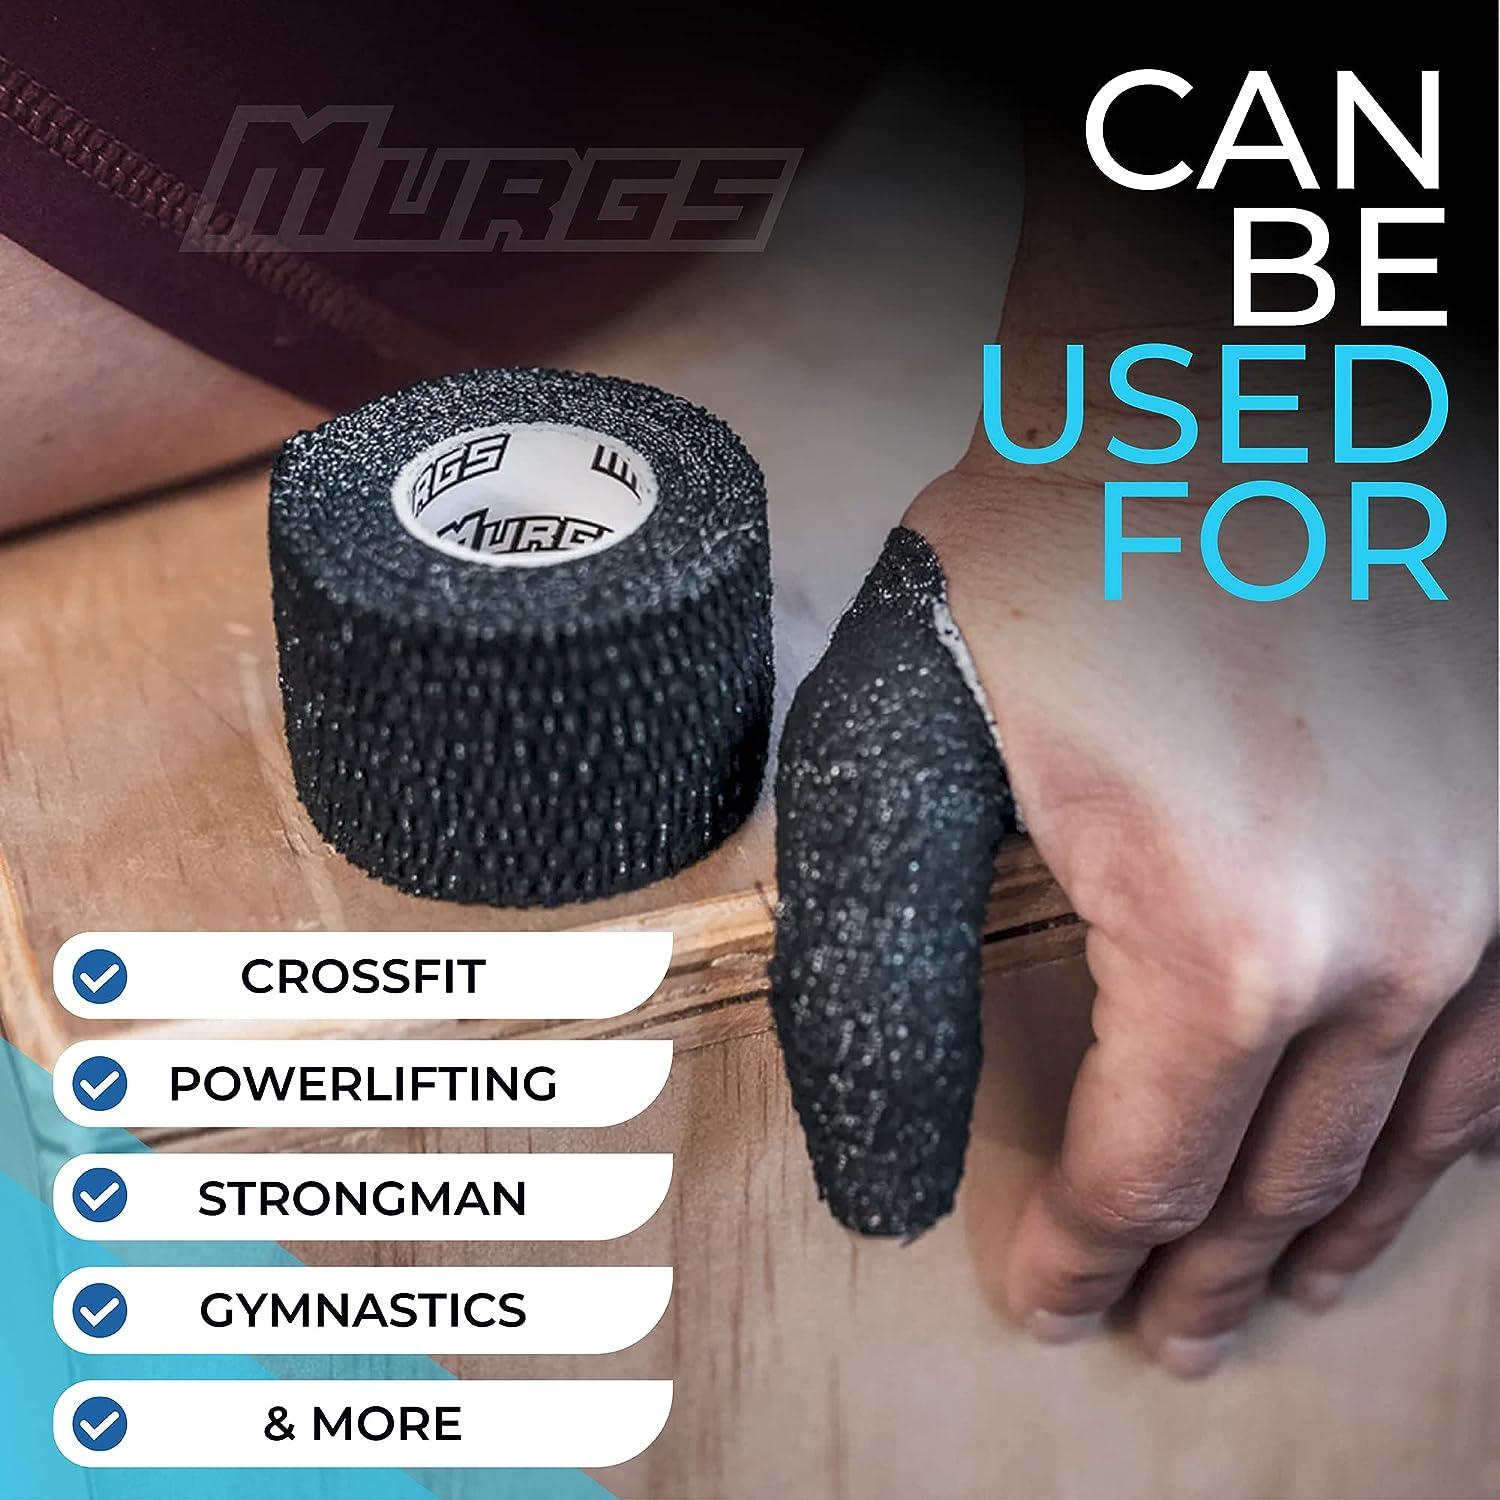 How To Use Thumb Tape For: Weightlifting, CrossFit, Hook Grip